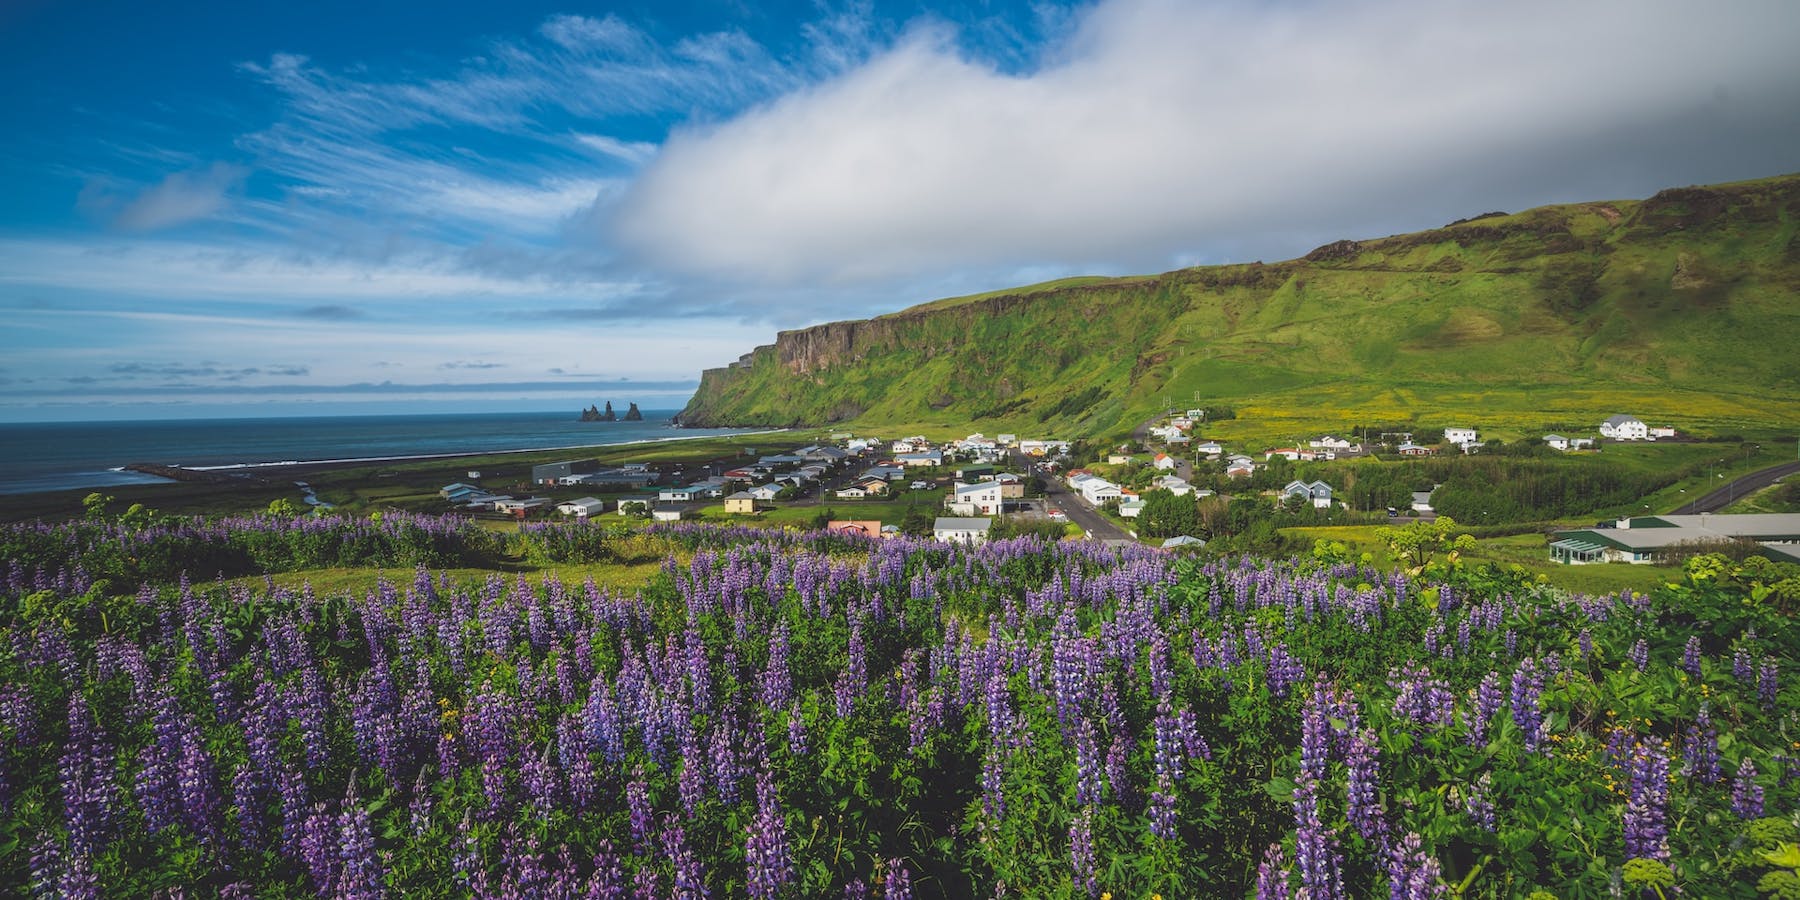 Summer in Iceland with lavender fields